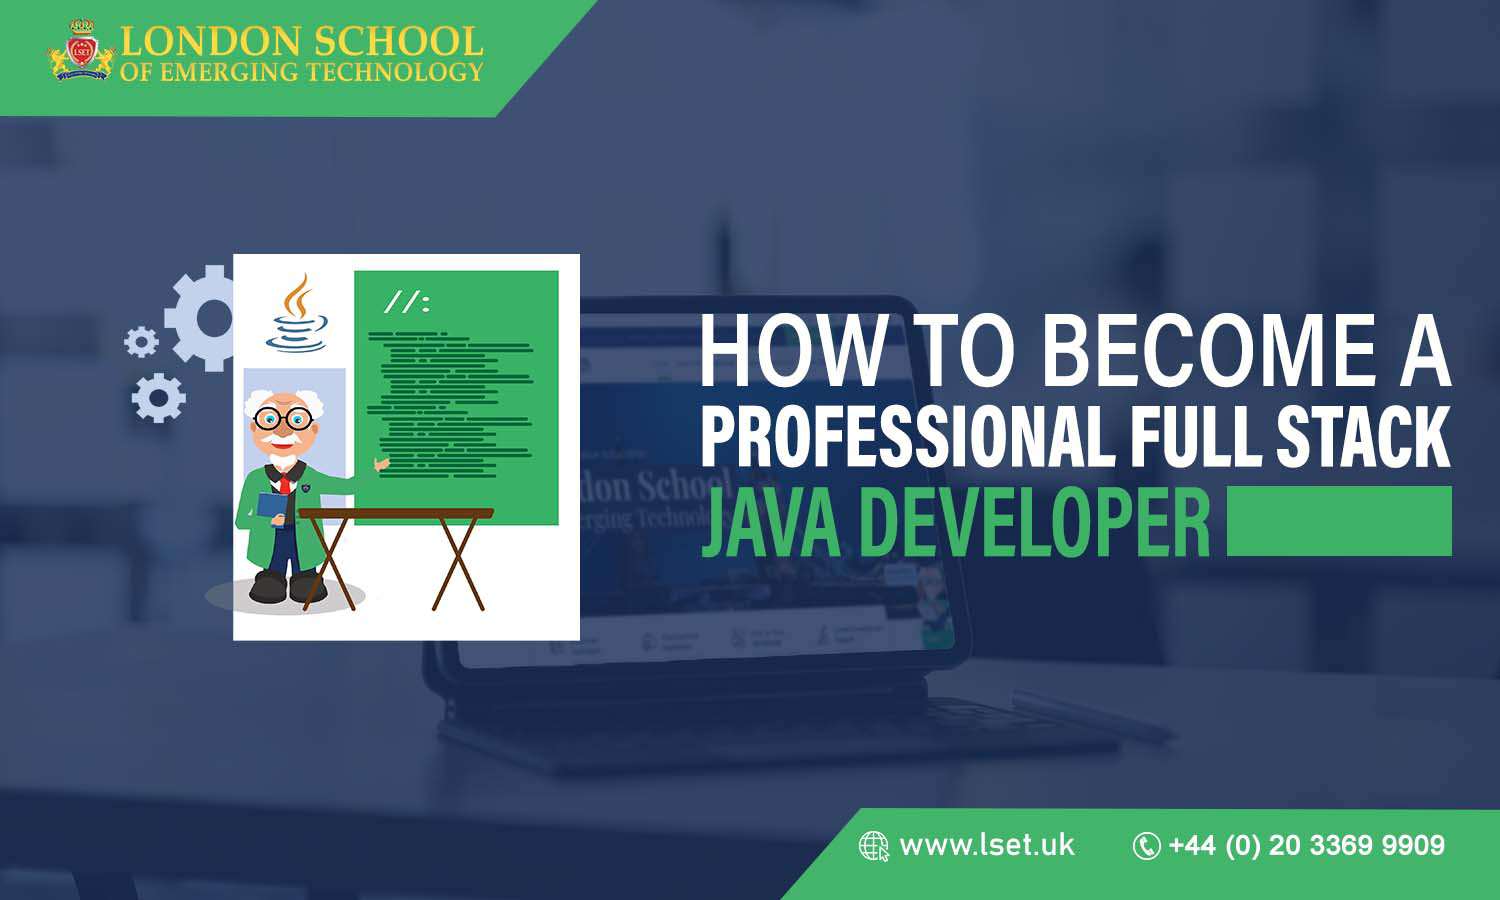 How to Become a Professional Full Stack Java Developer